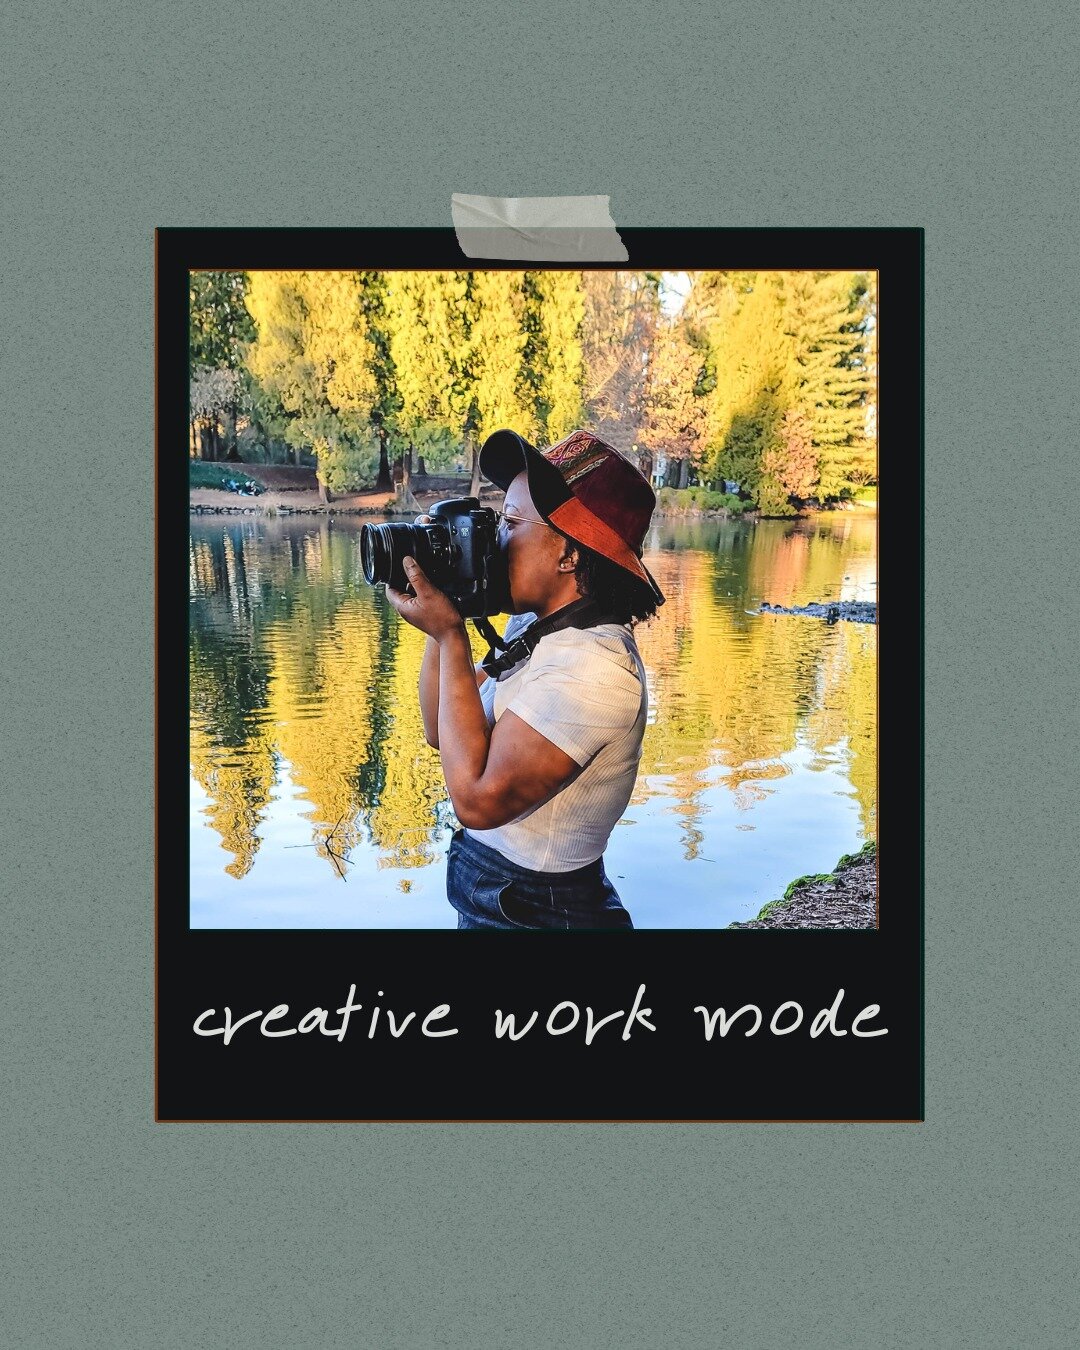 I invite you to join me on a journey of artistic exploration this upcoming week. 

Let's find moments to dive deep into our creative passions - whether writing, painting, designing, photography or any other passion that ignites our soul - and embrace